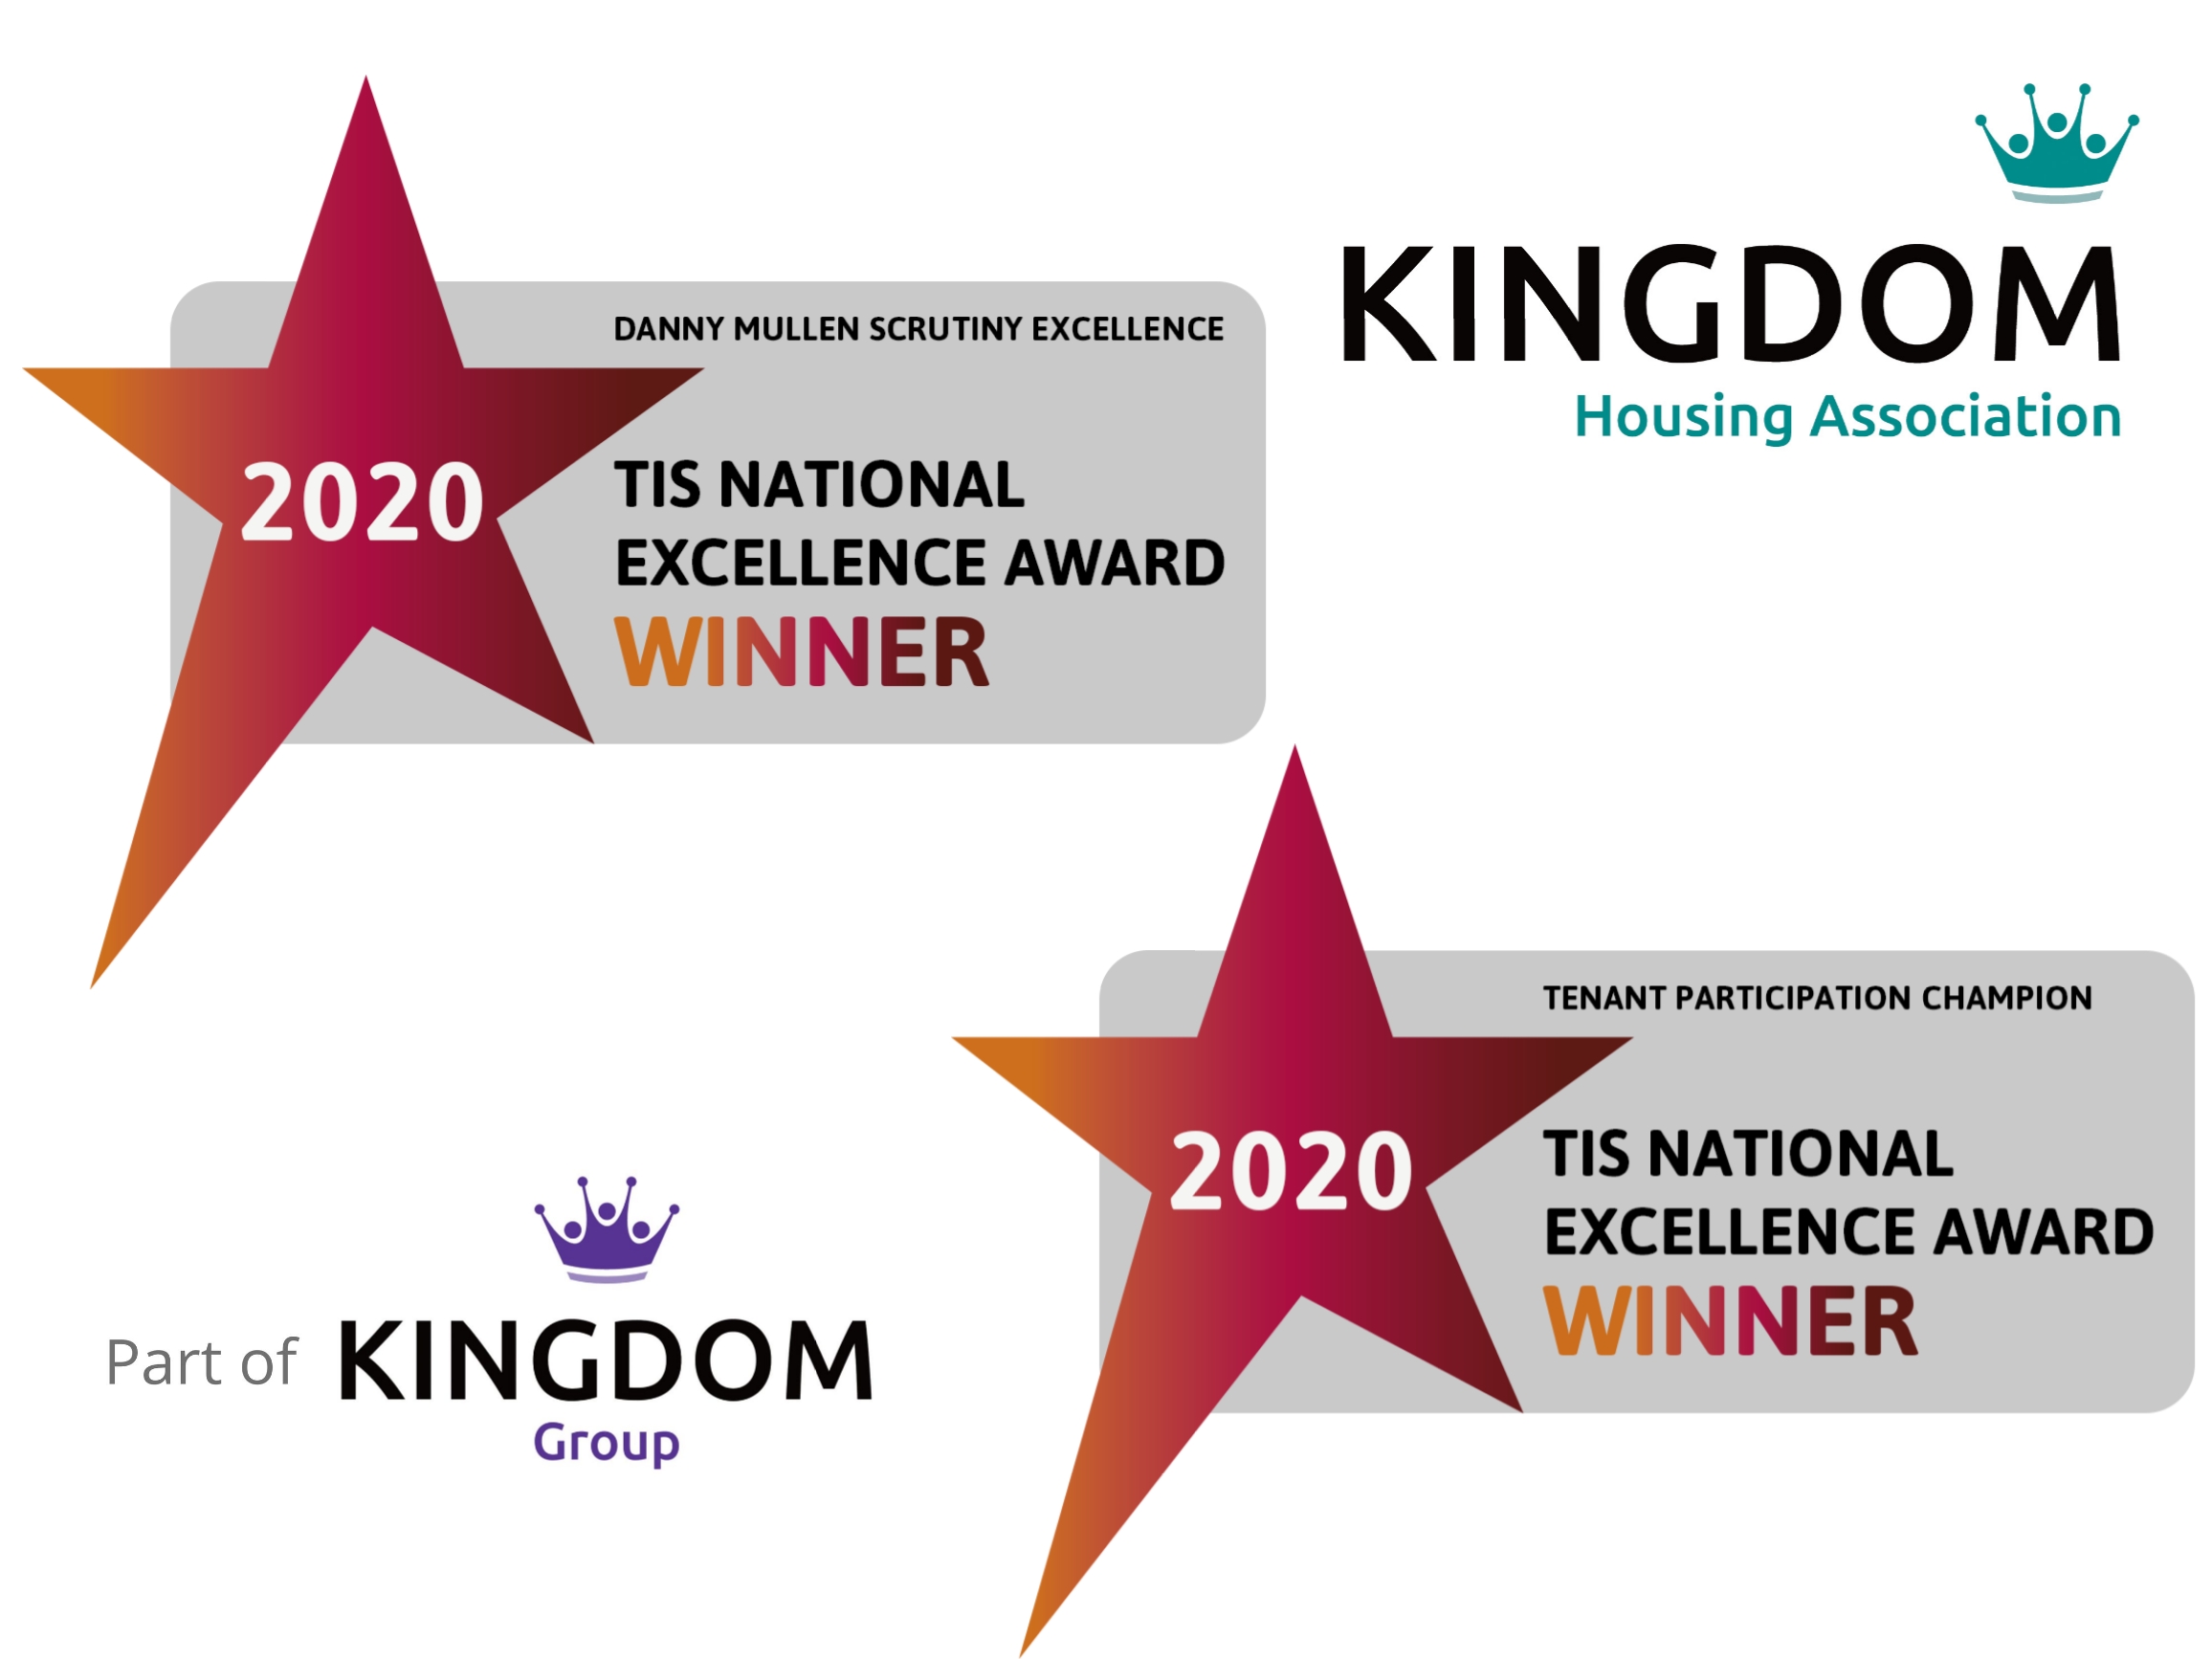 Success for Kingdom at TIS National Excellence awards 2020